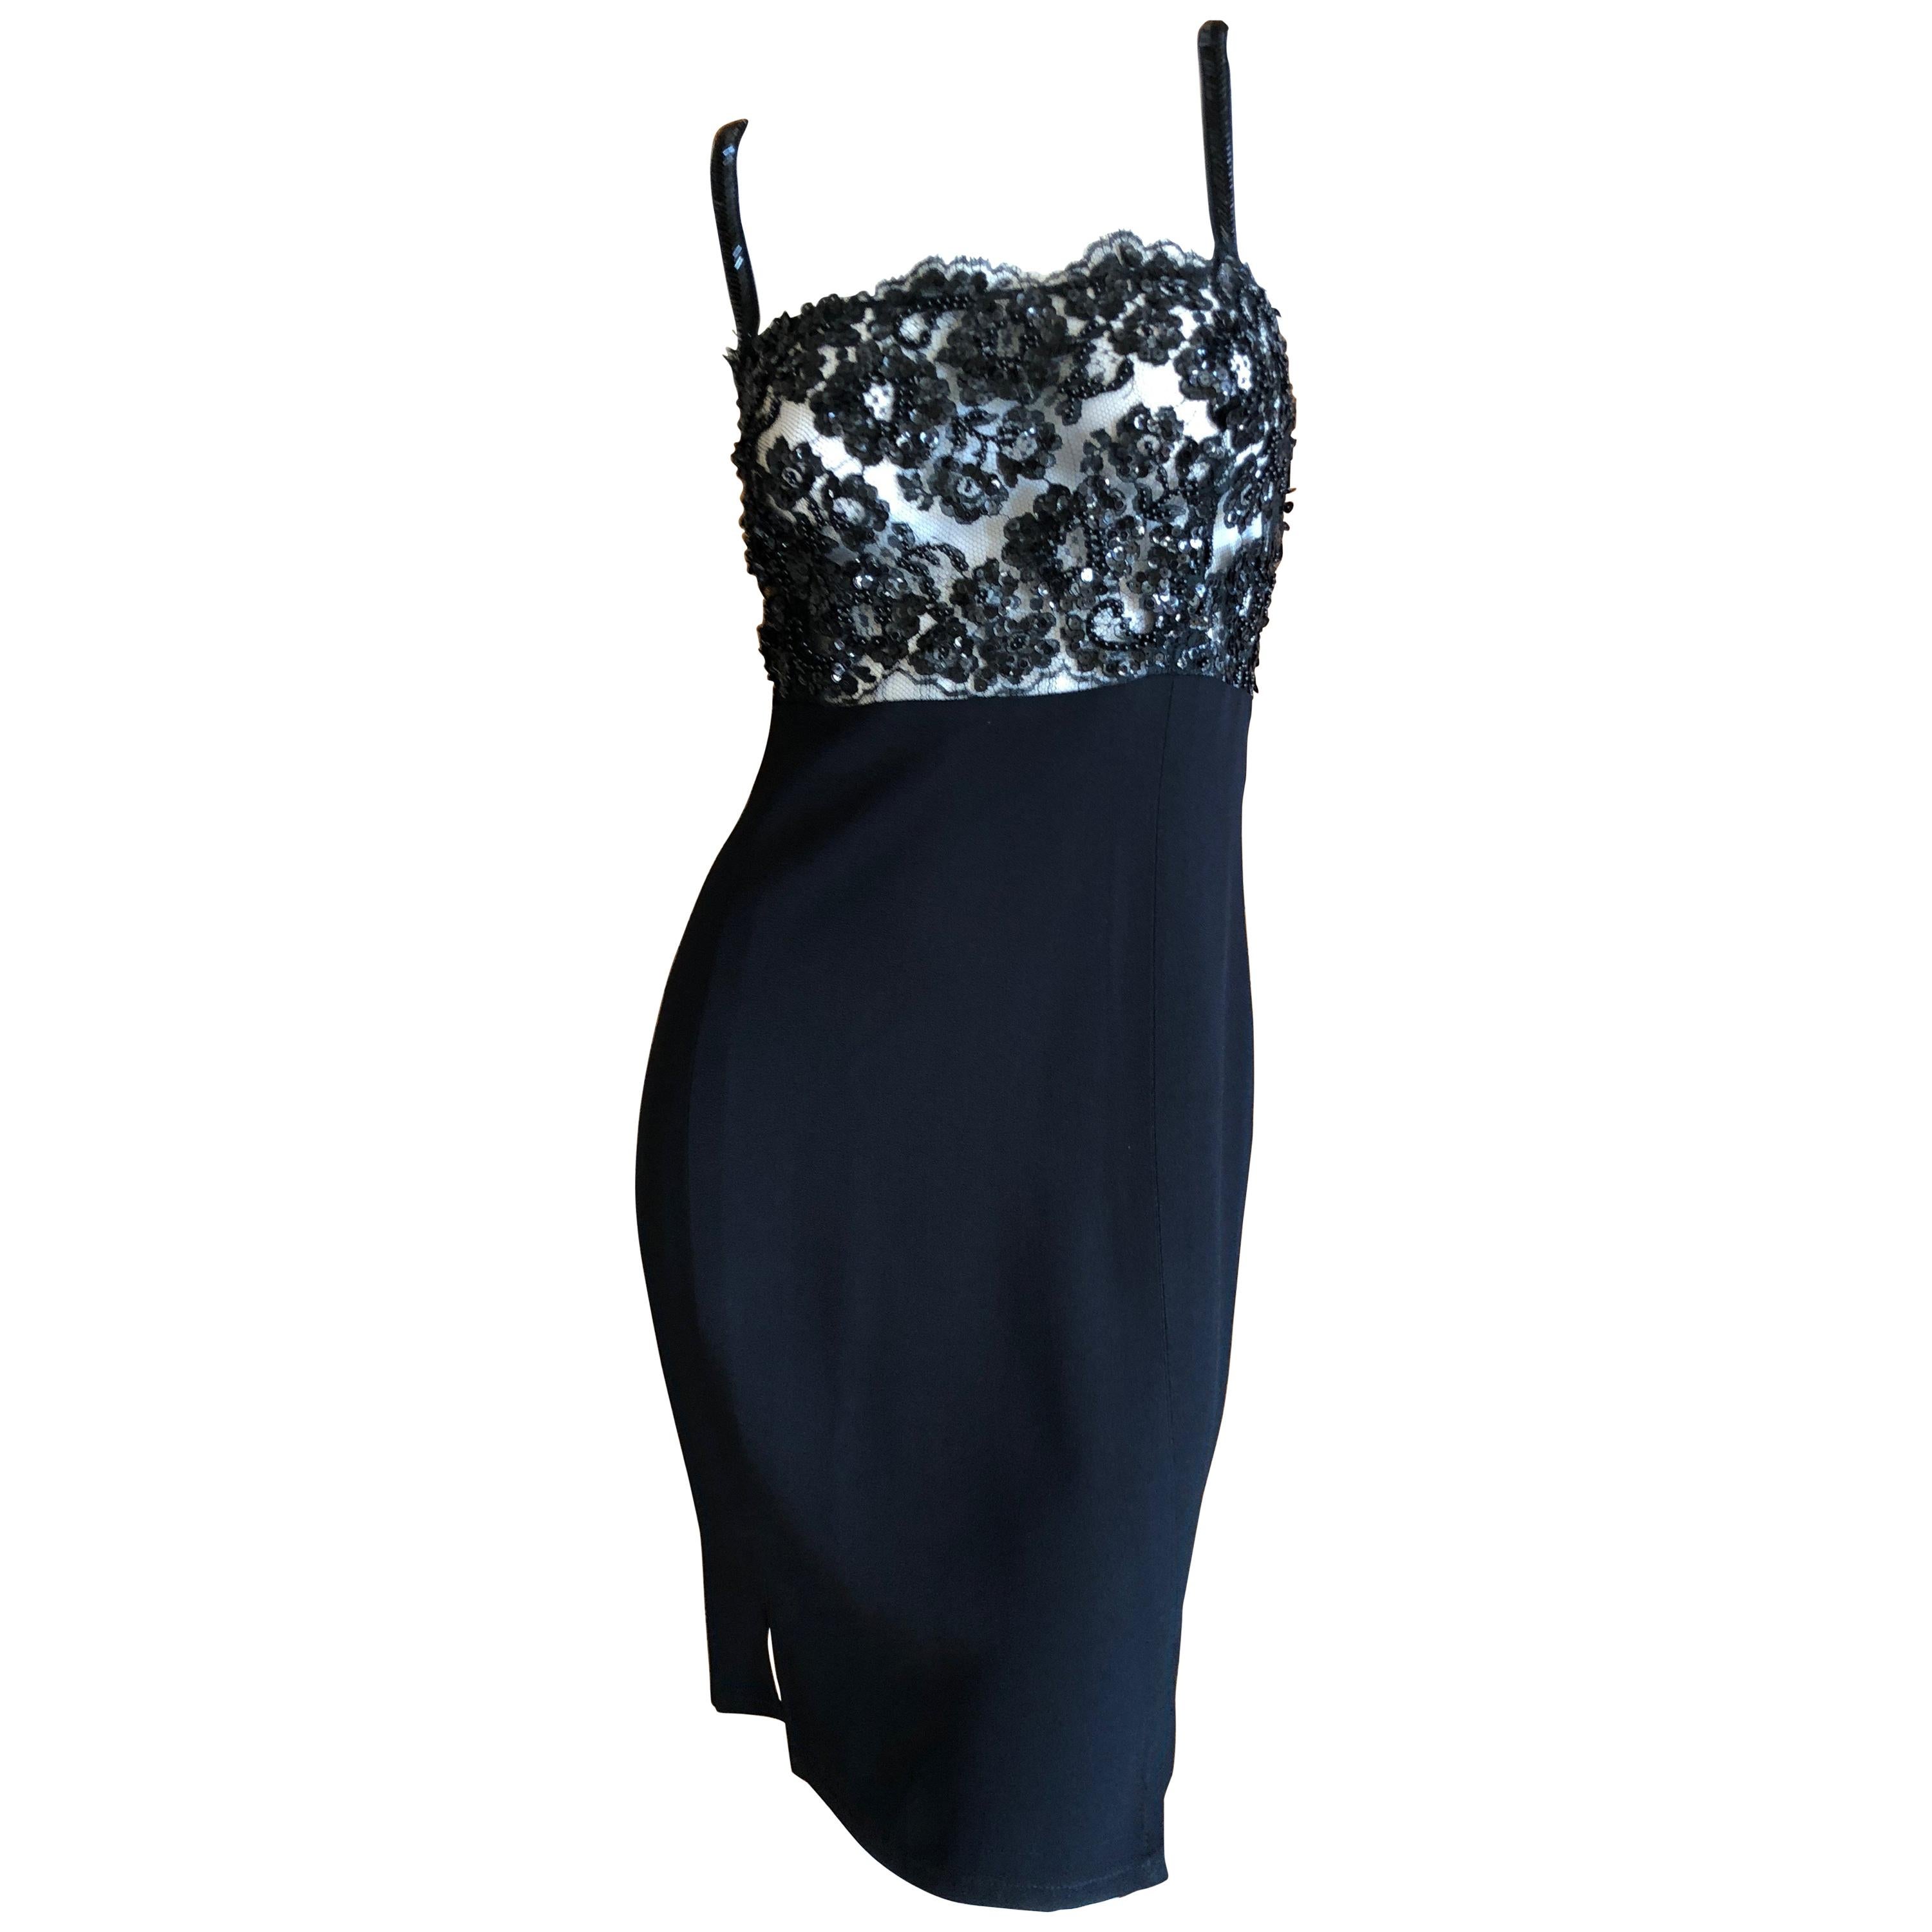 Sonia Rykiel LBD with Sheer Sequin Accented Lace Bodice For Sale